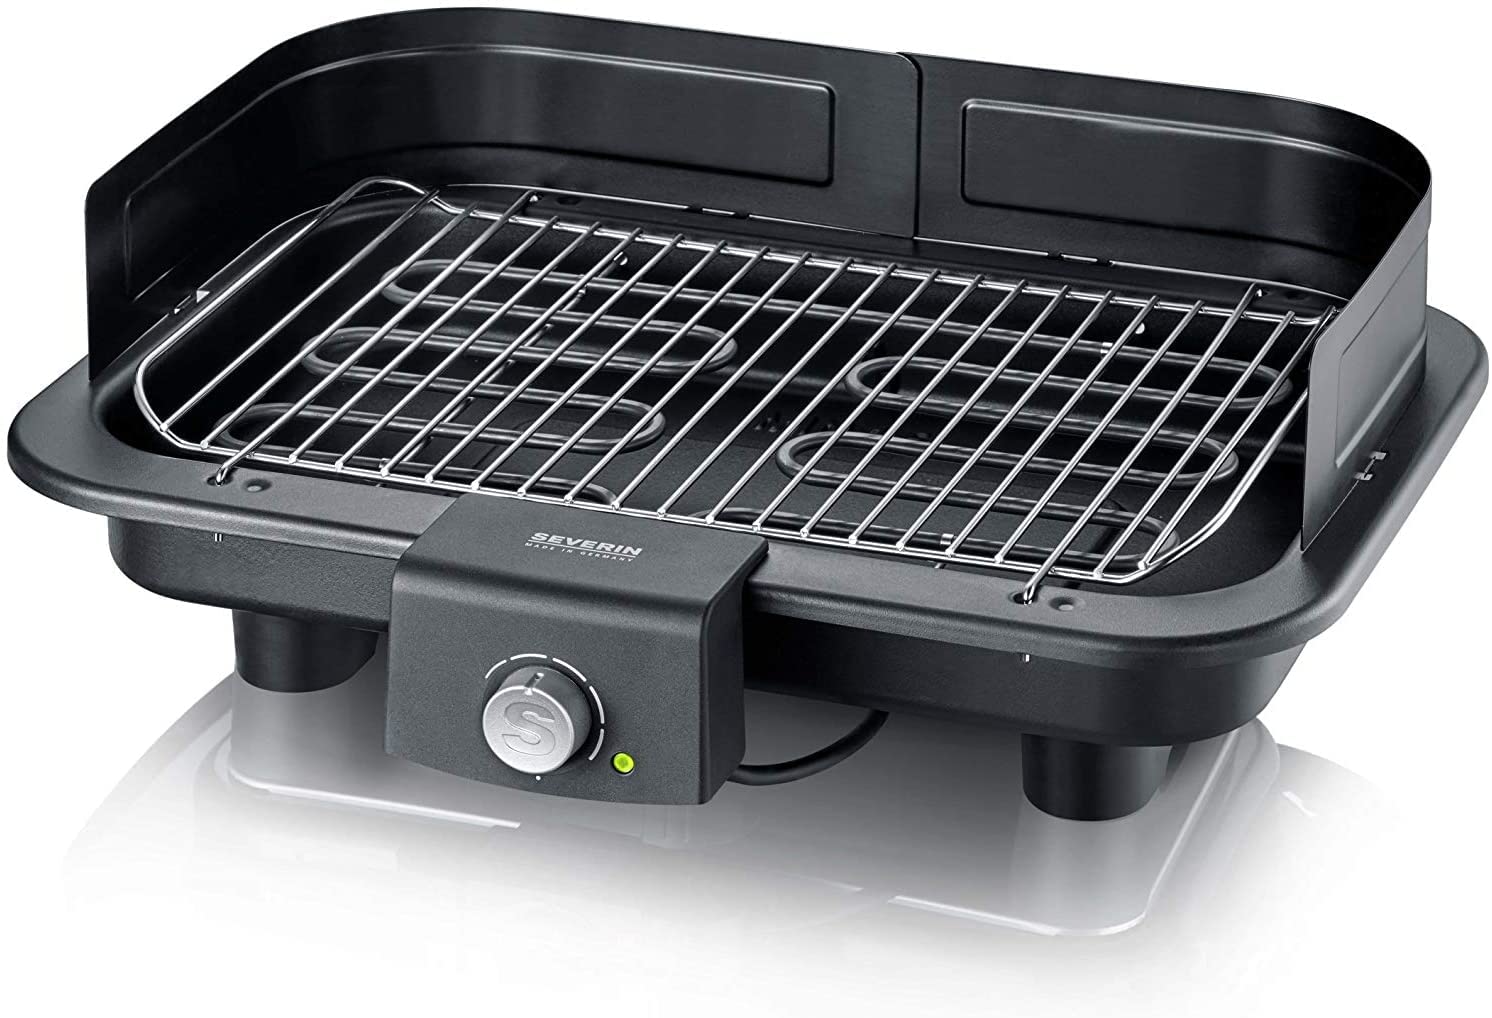 Severin PG 8547 Barbecue/Table Grill 2,500 W, Grill Surface, 41 x 26 cm, Black